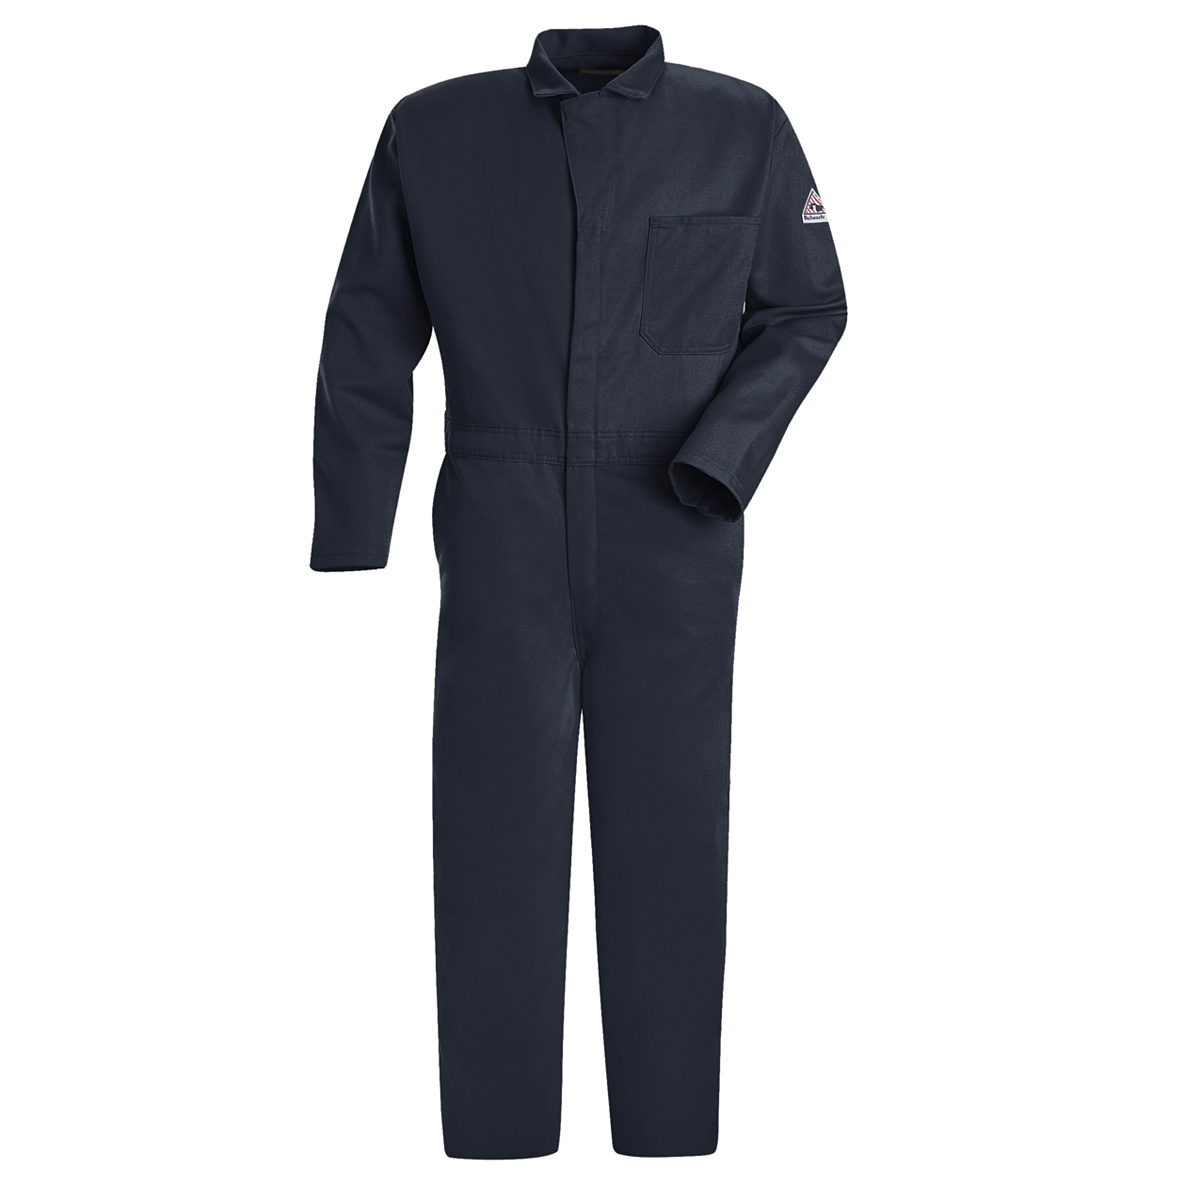 Bulwark® 42 Tall Navy Blue EXCEL FR® Twill Cotton Flame Resistant Coveralls With Zipper Front Closure